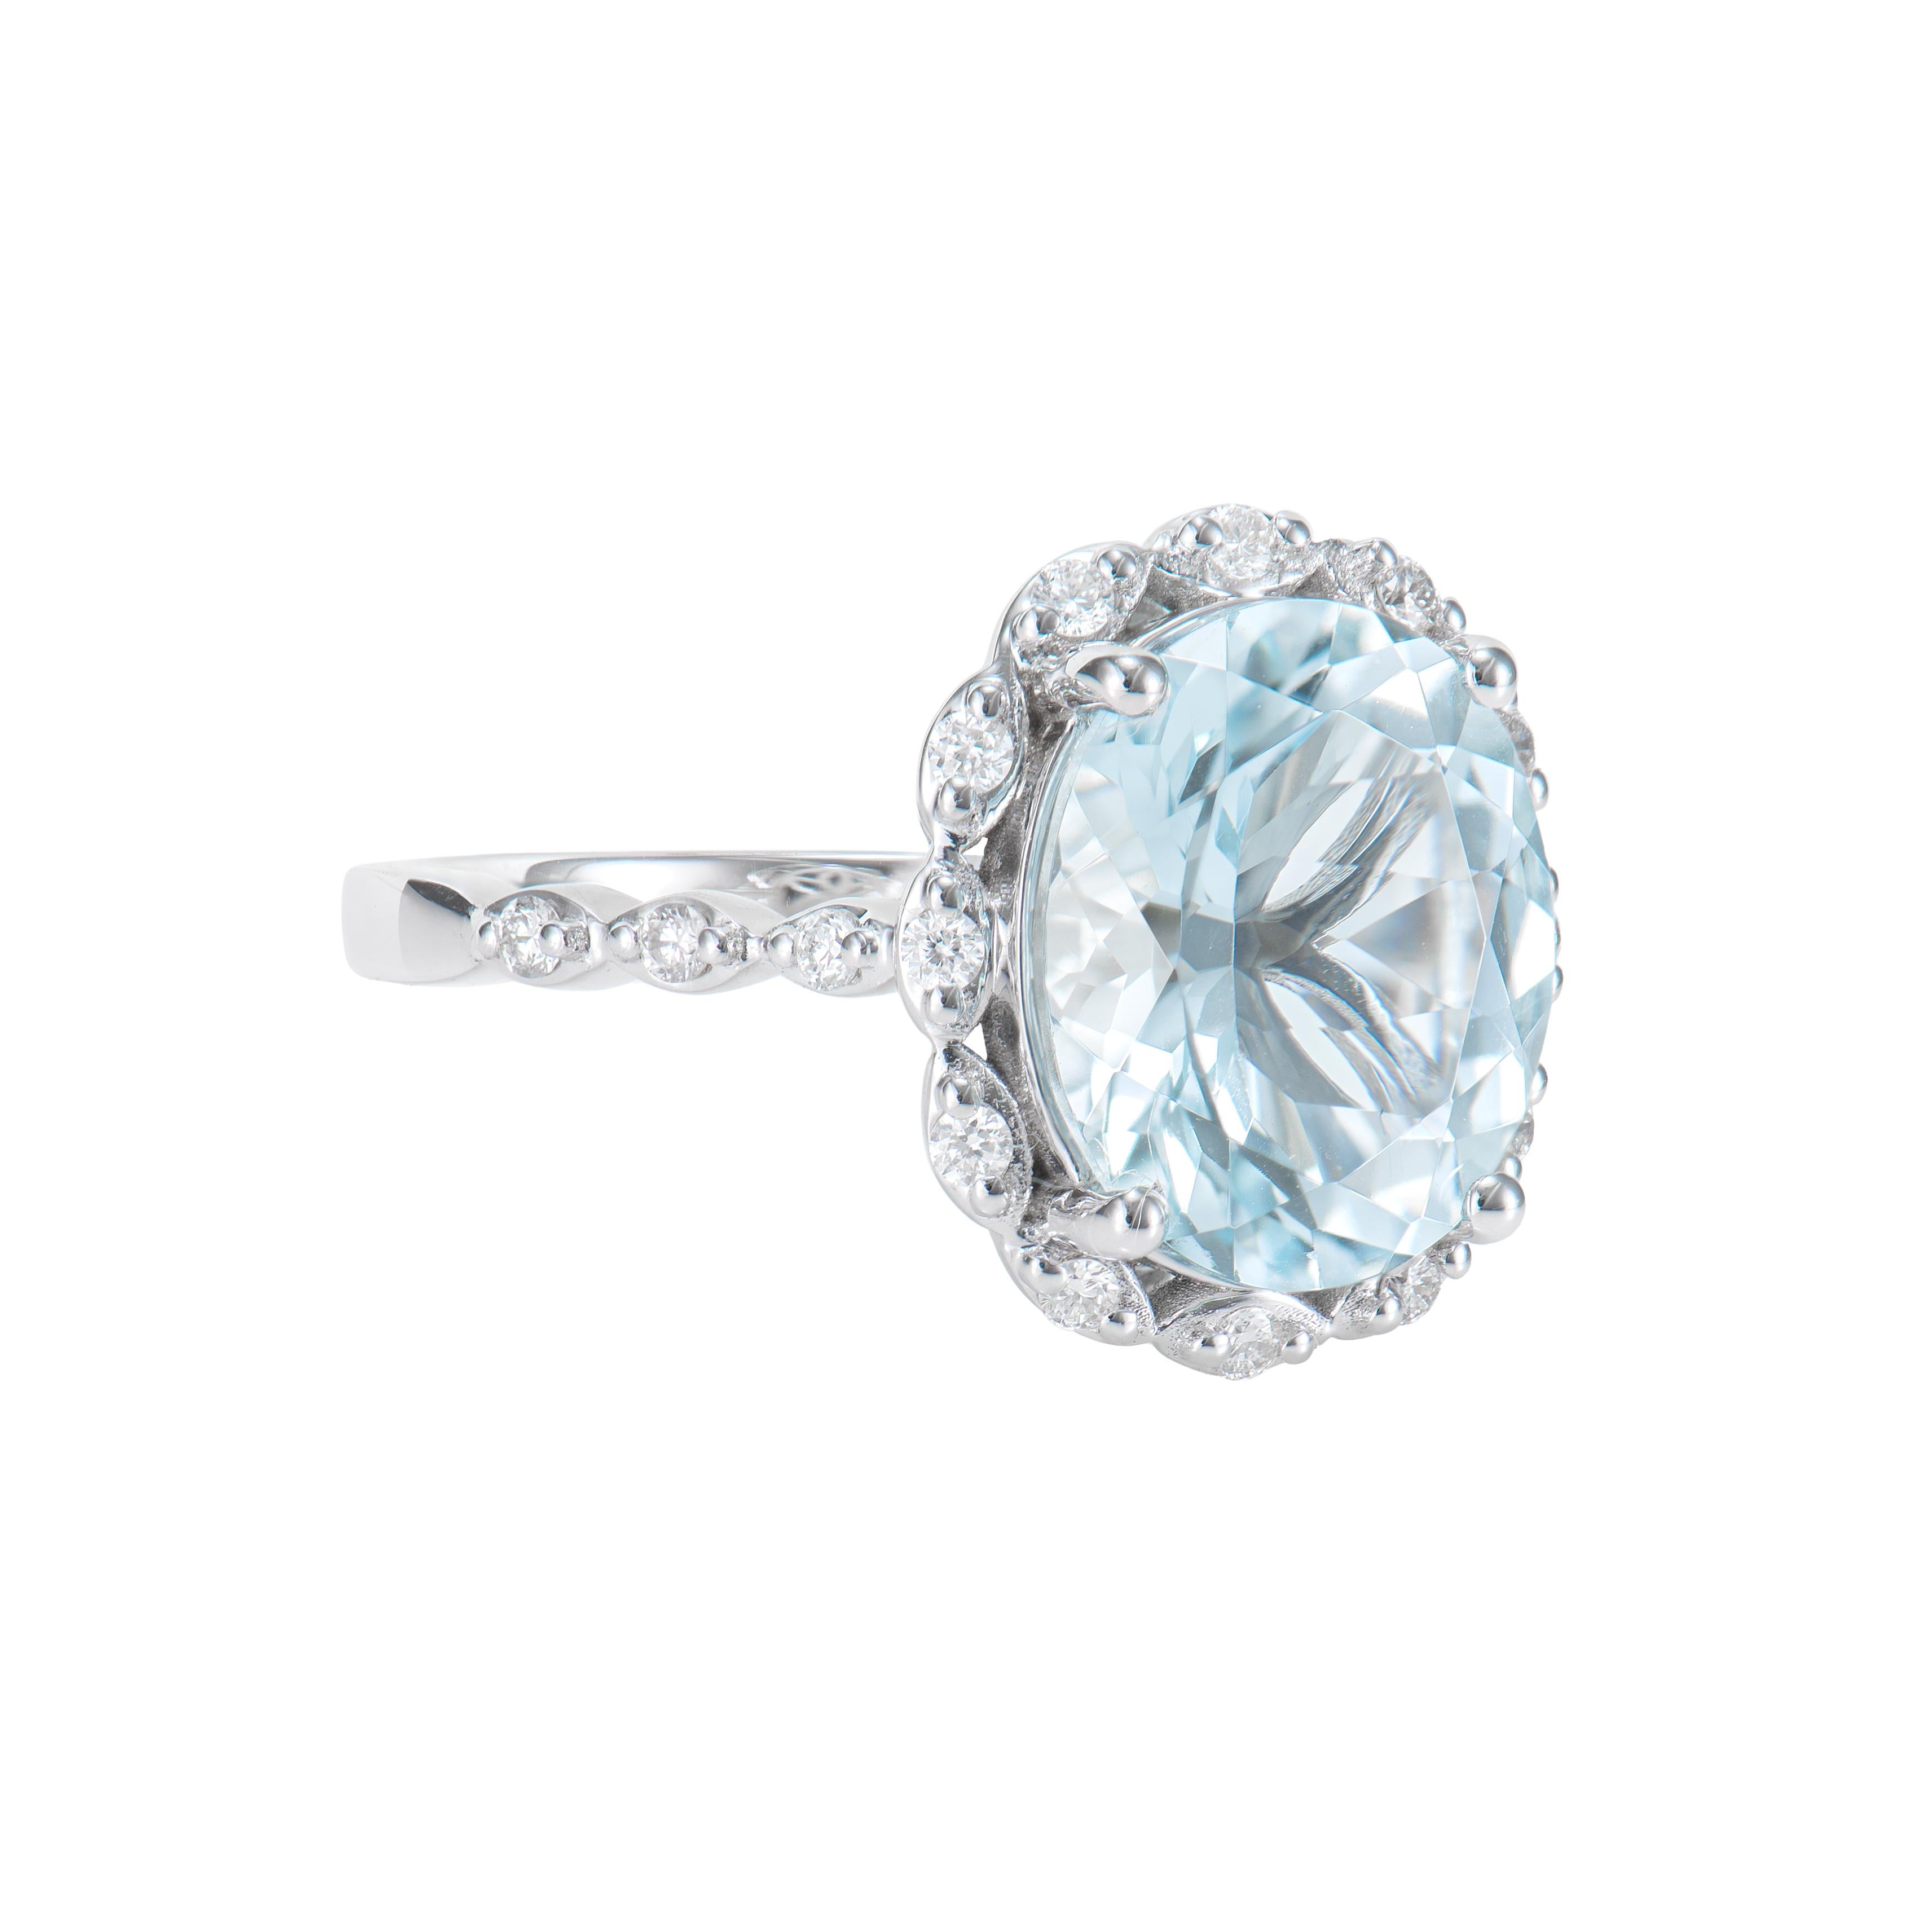 This collection features an array of aquamarines with an icy blue hue that is as cool as it gets! Accented with White Diamonds these Ring are made in white gold and present a classic yet elegant look. 

Aquamarine Elegant Ring in 18Karat Whtie Gold